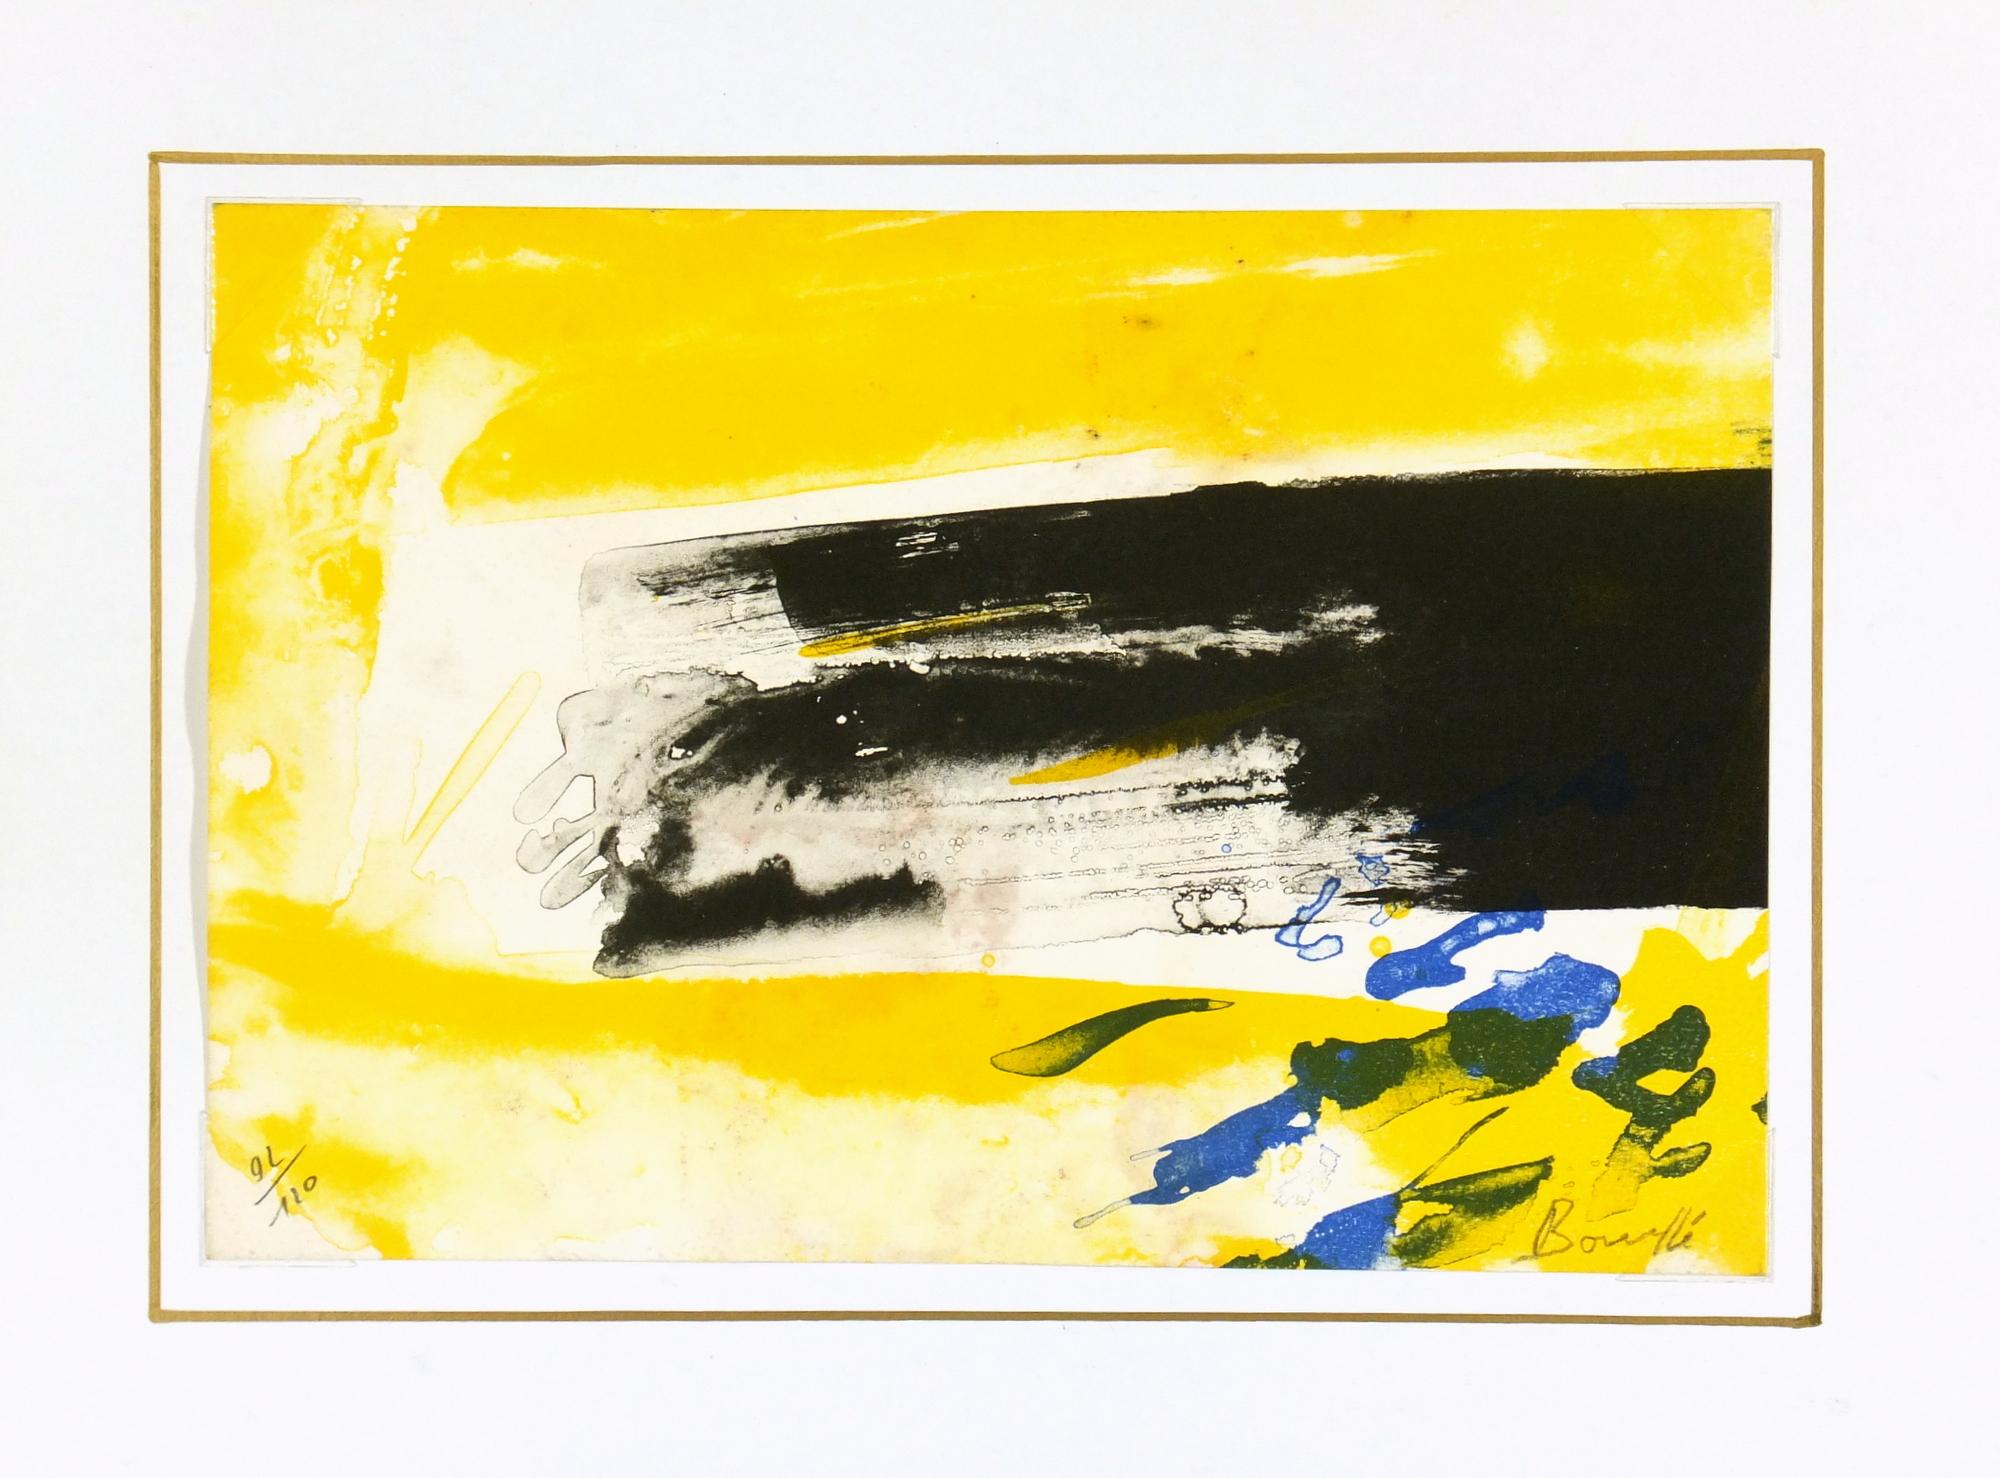 Bright sunshine yellow abstract painting with black streaks and blue splatters, by artist Charles Bouille´, 1995. Displayed in a white mat with a gold border and fits a standard-size frame. Archival plastic sleeve and Certificate of Authenticity